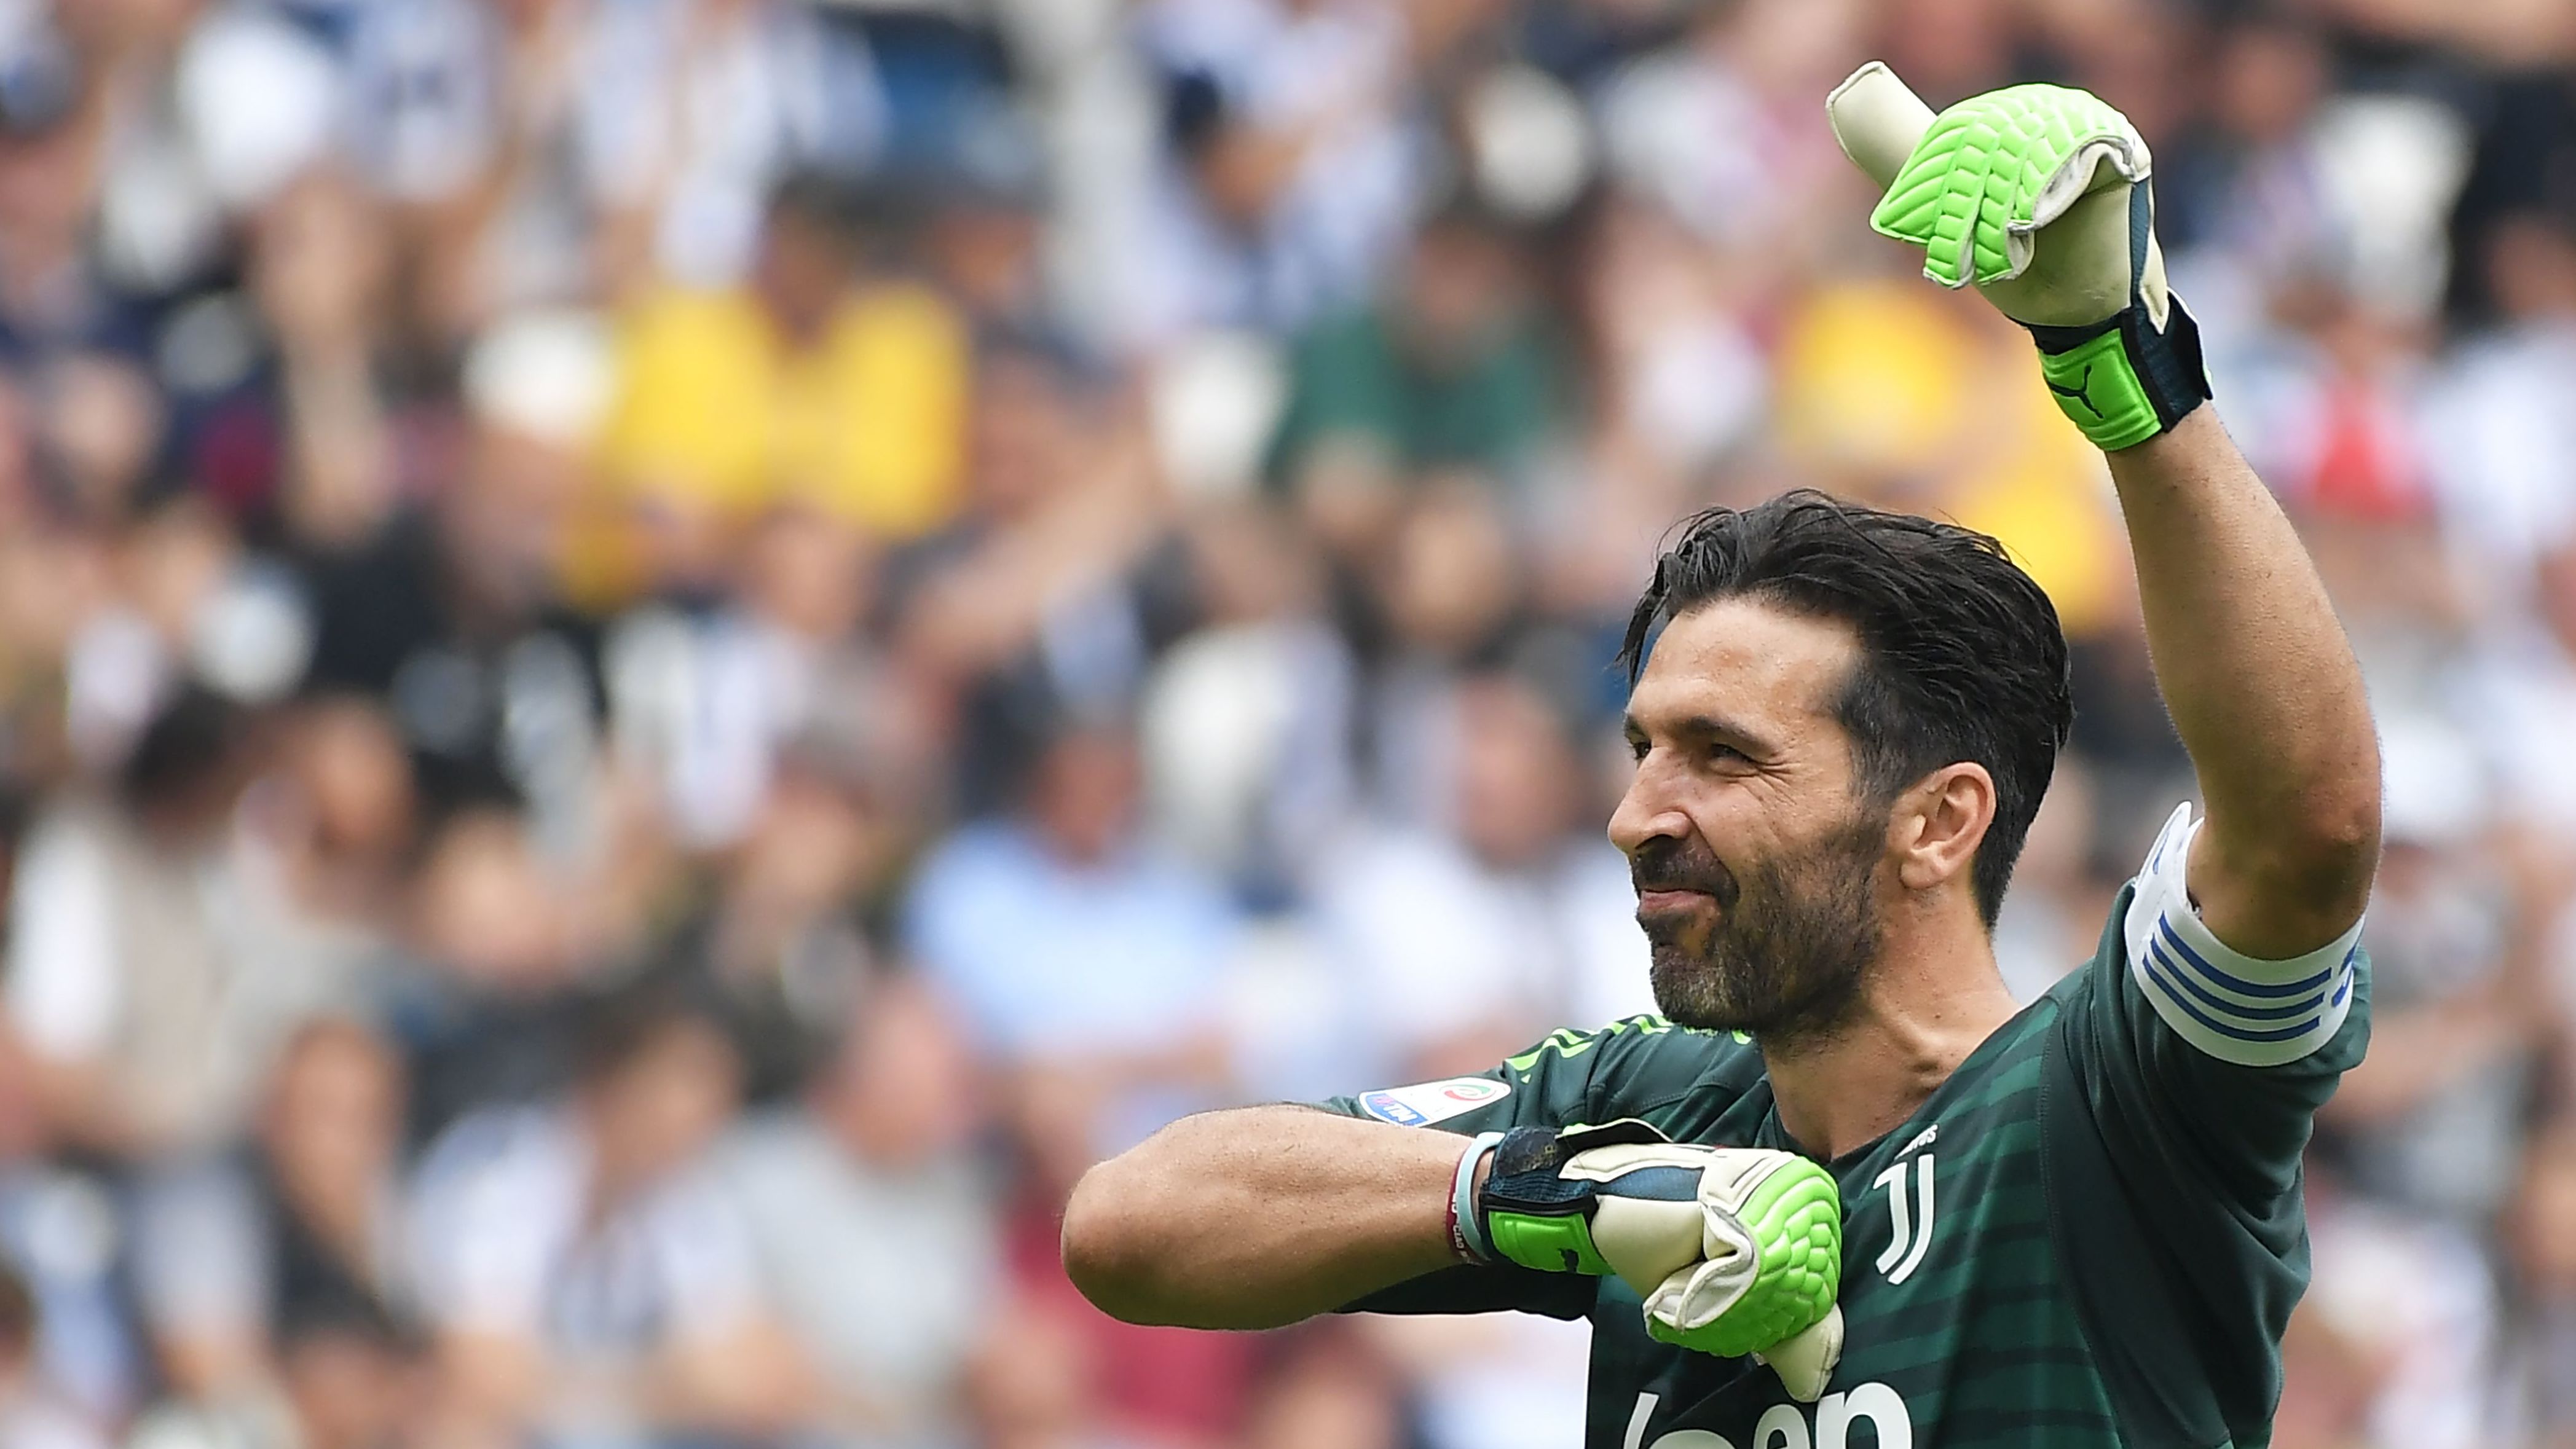 Buffon greeted Juventus fans one last time Saturday, 17 years after joining the club from Parma for a world record $43.7 million. 